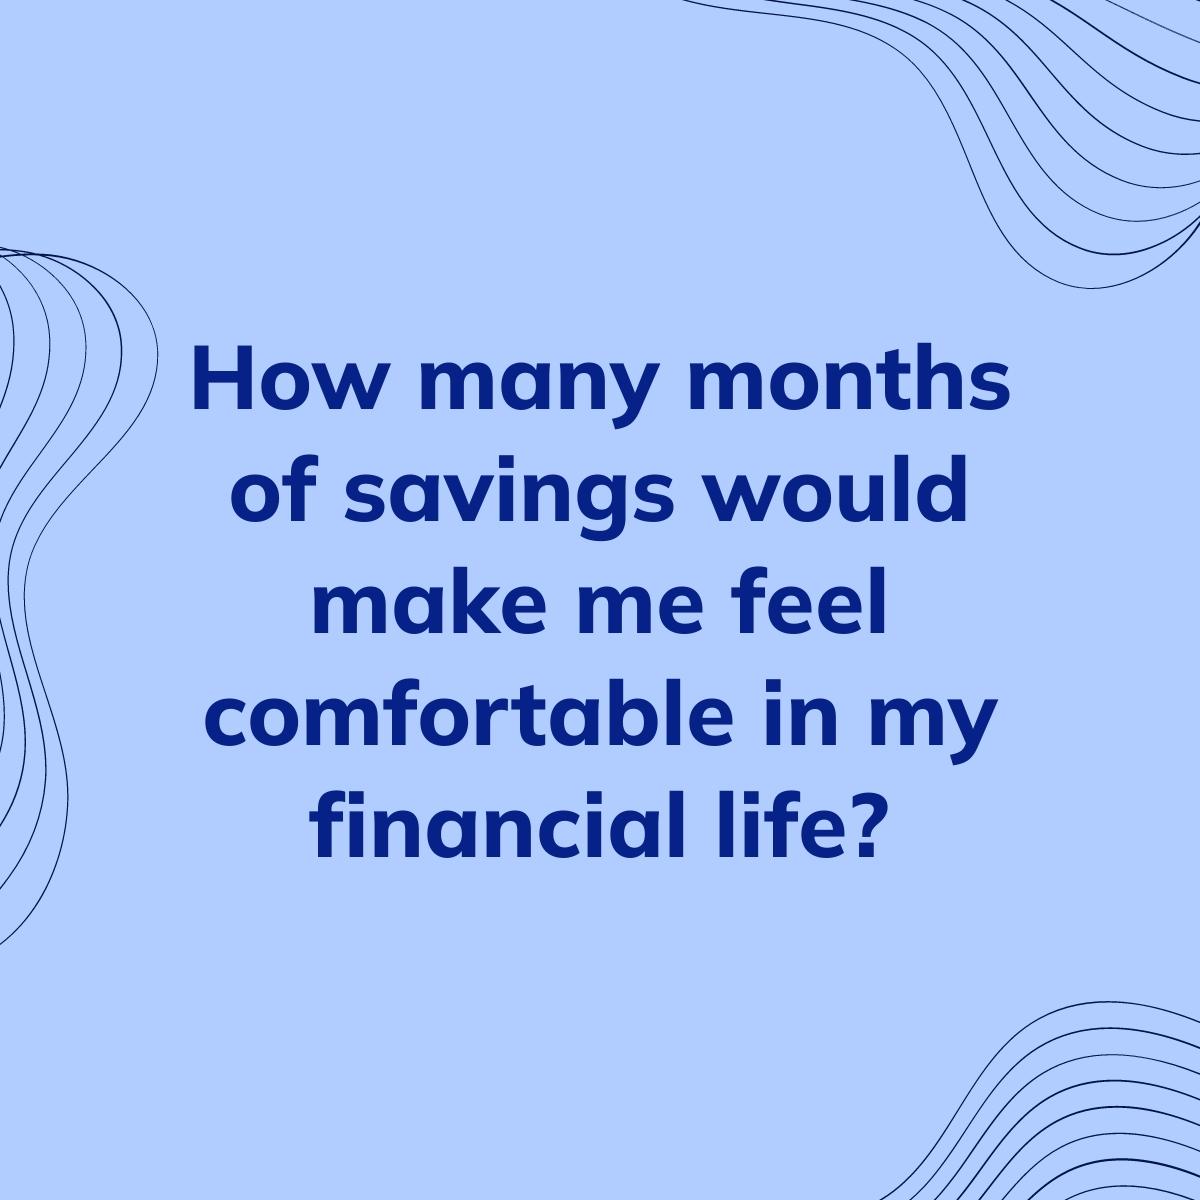 Journal Prompt: How many months of savings would make me feel comfortable in my financial life?